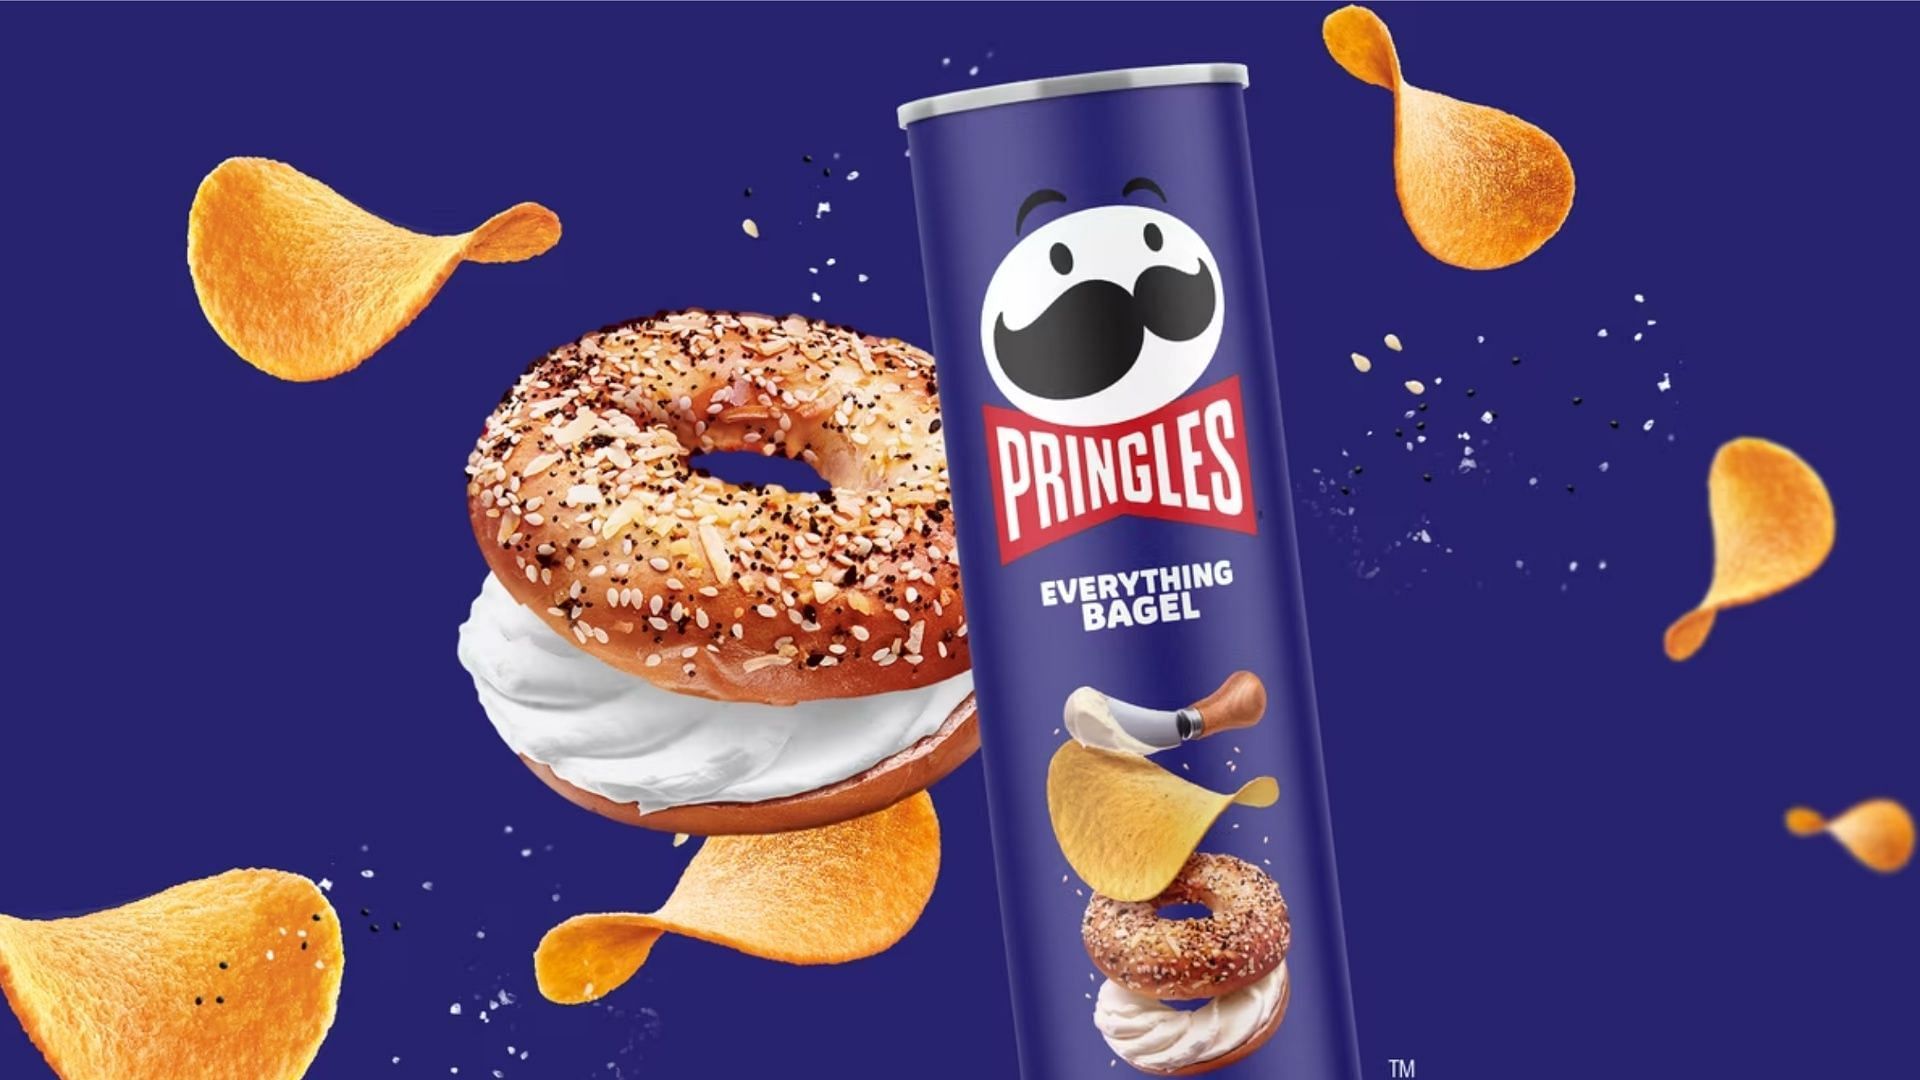 The limited edition &lsquo;Everything Bagel&rsquo; crisps hit stores this month (Image via Kellogg Company)